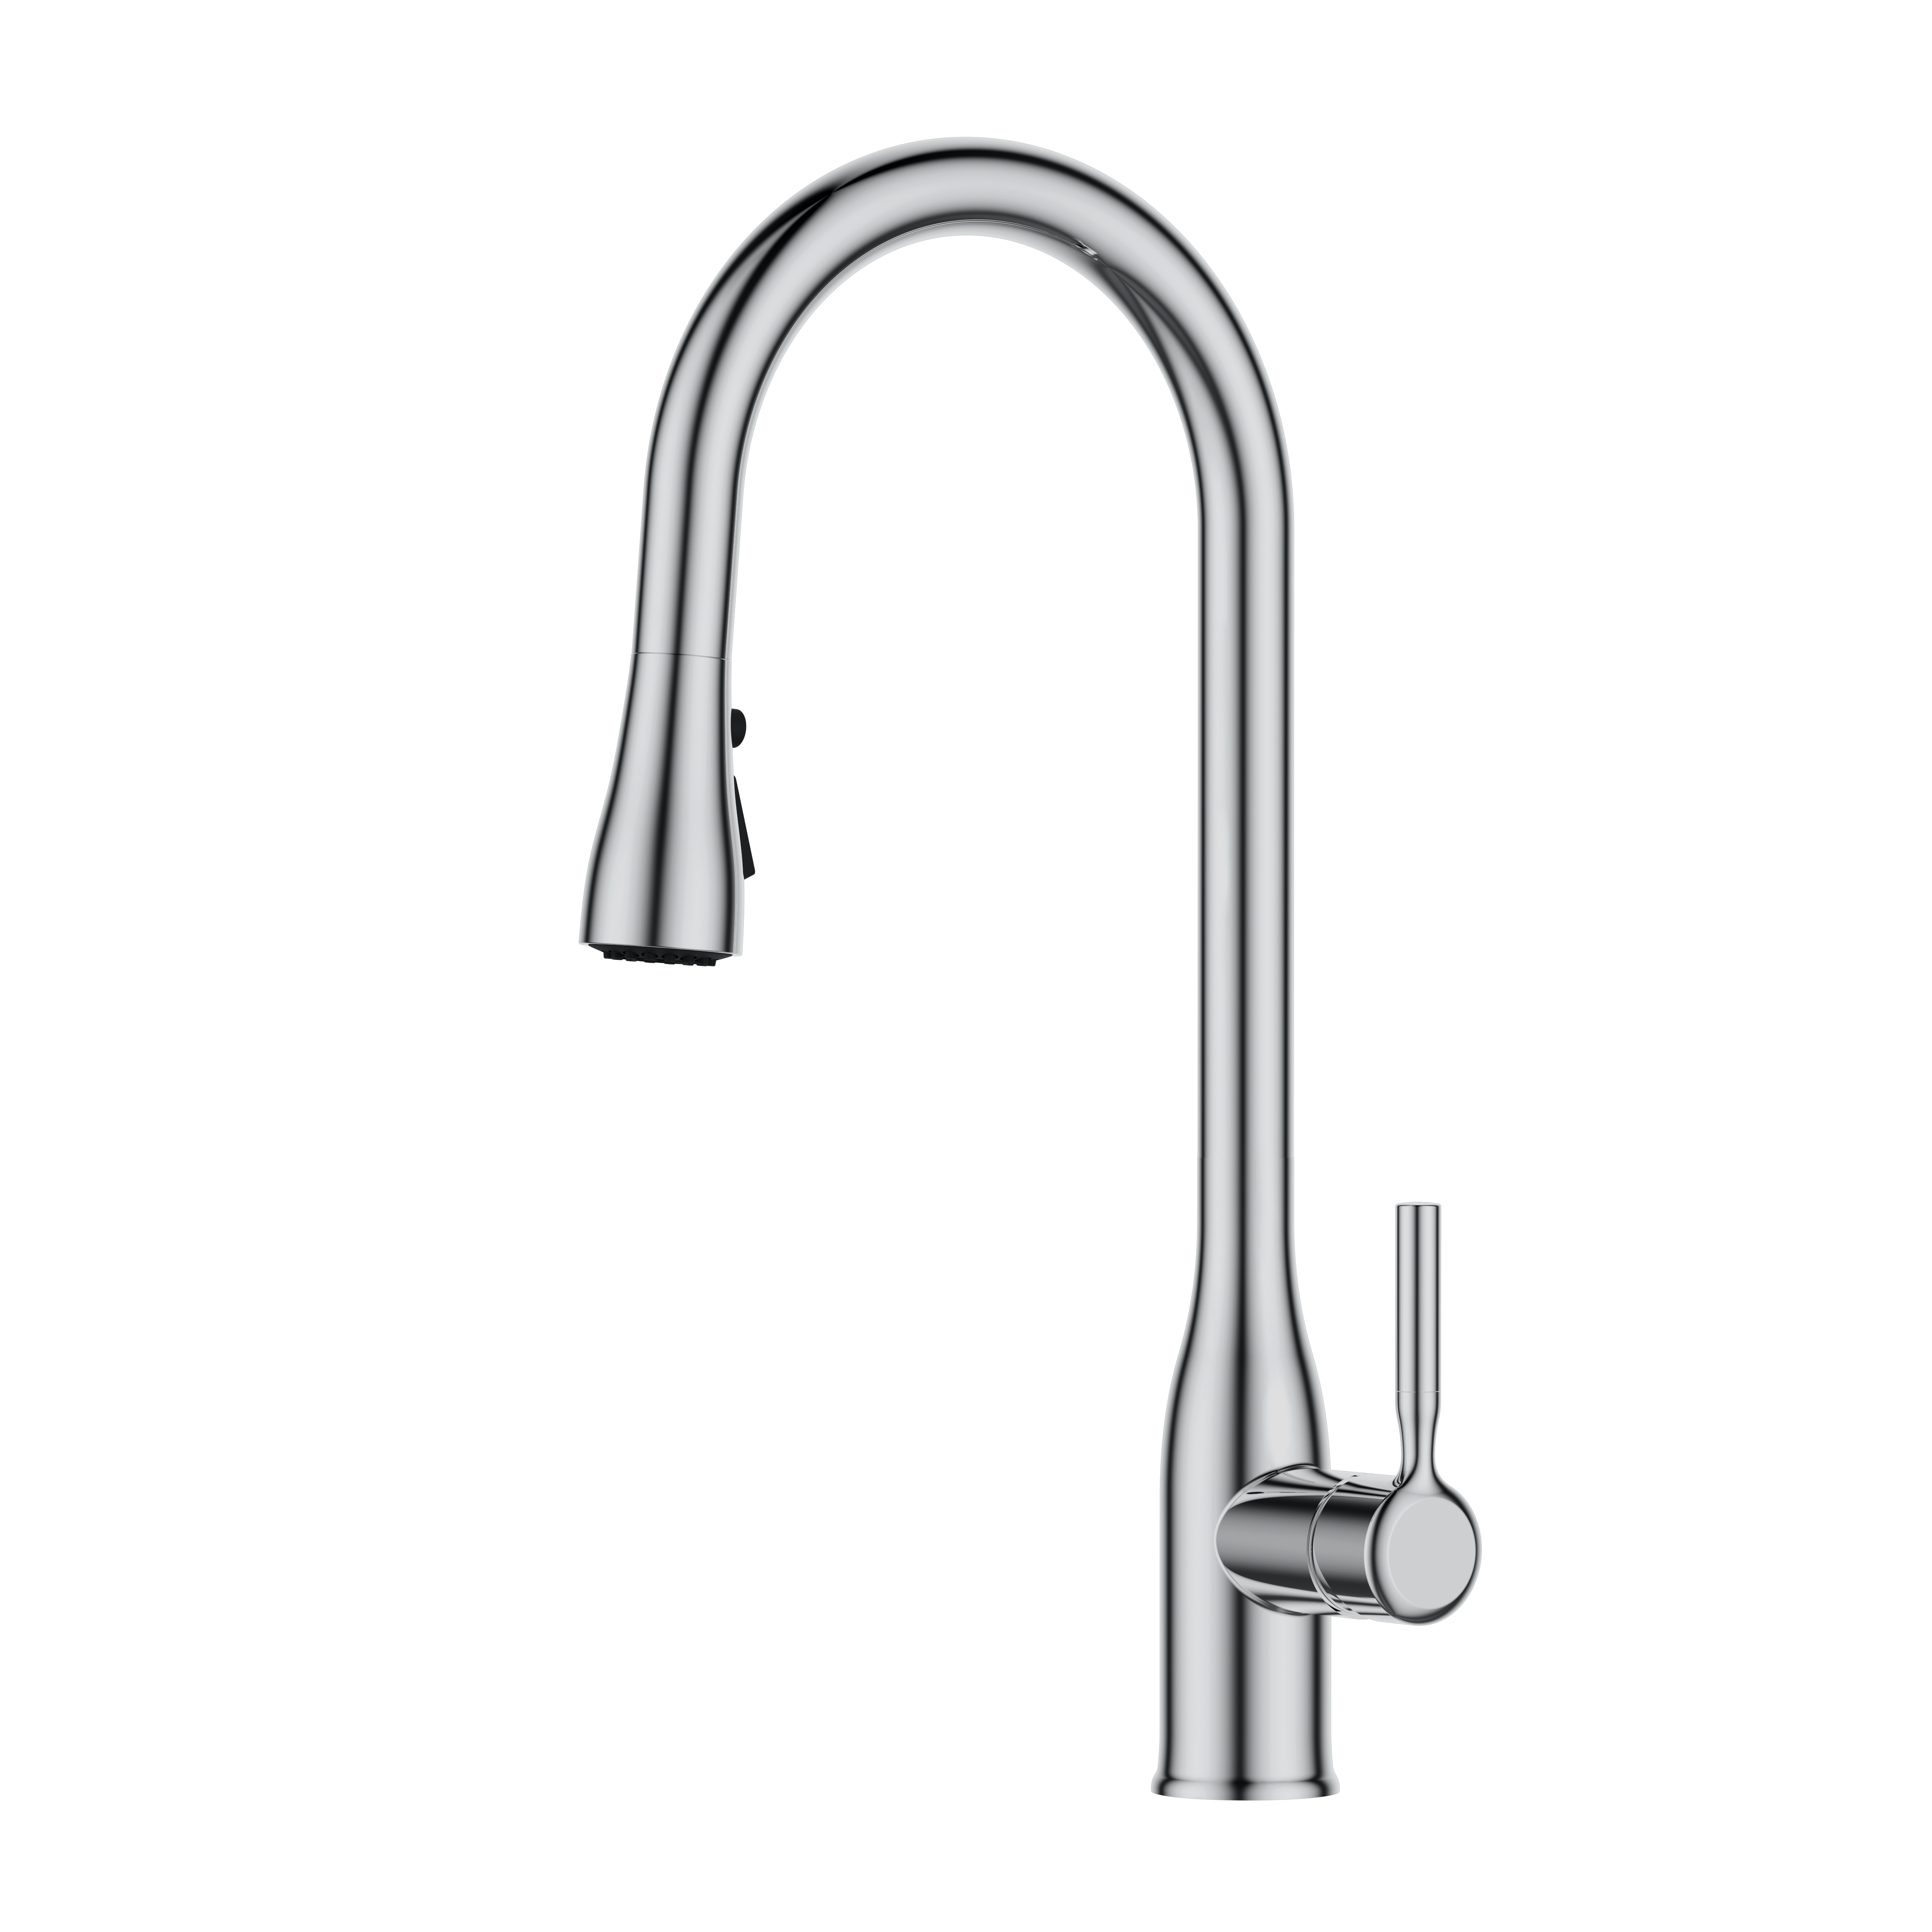 Hot Selling Kitchen Faucet Material Chrome